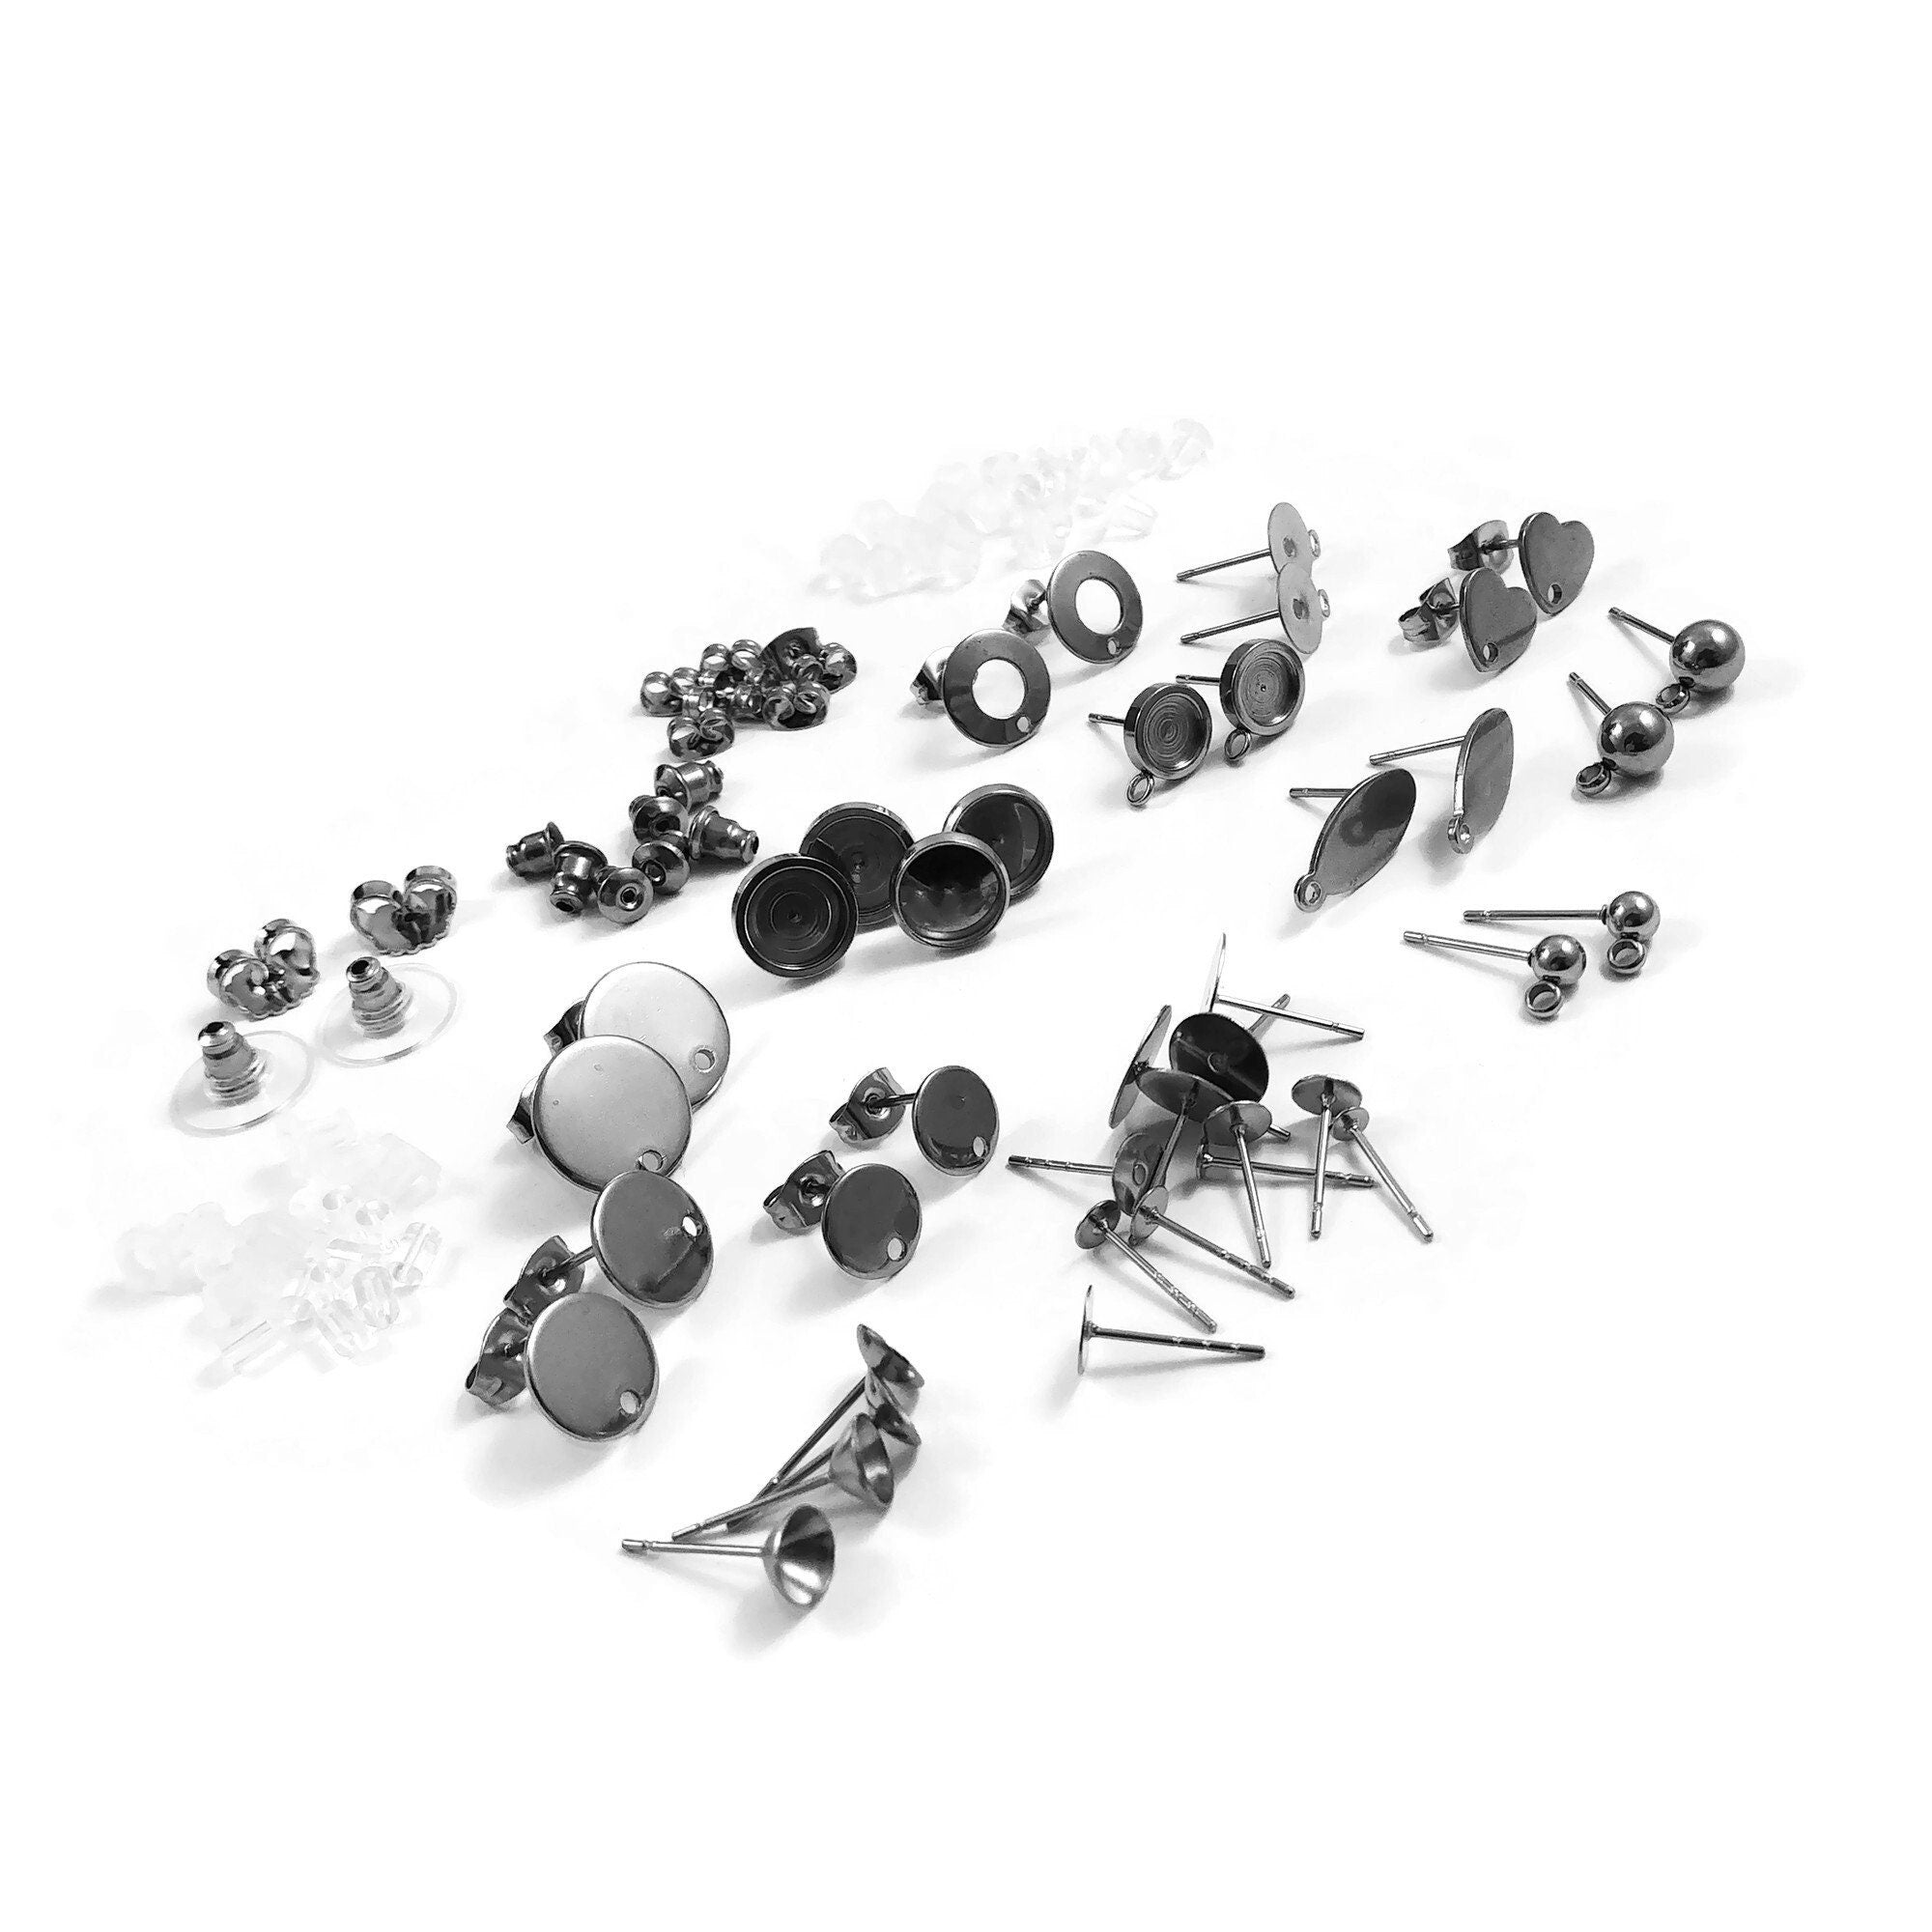 Modacraft 3202pcs Earring Posts and Backs, Hypoallergenic Stud Earrings Making Supplies Kit Including Stainless Steel Earring